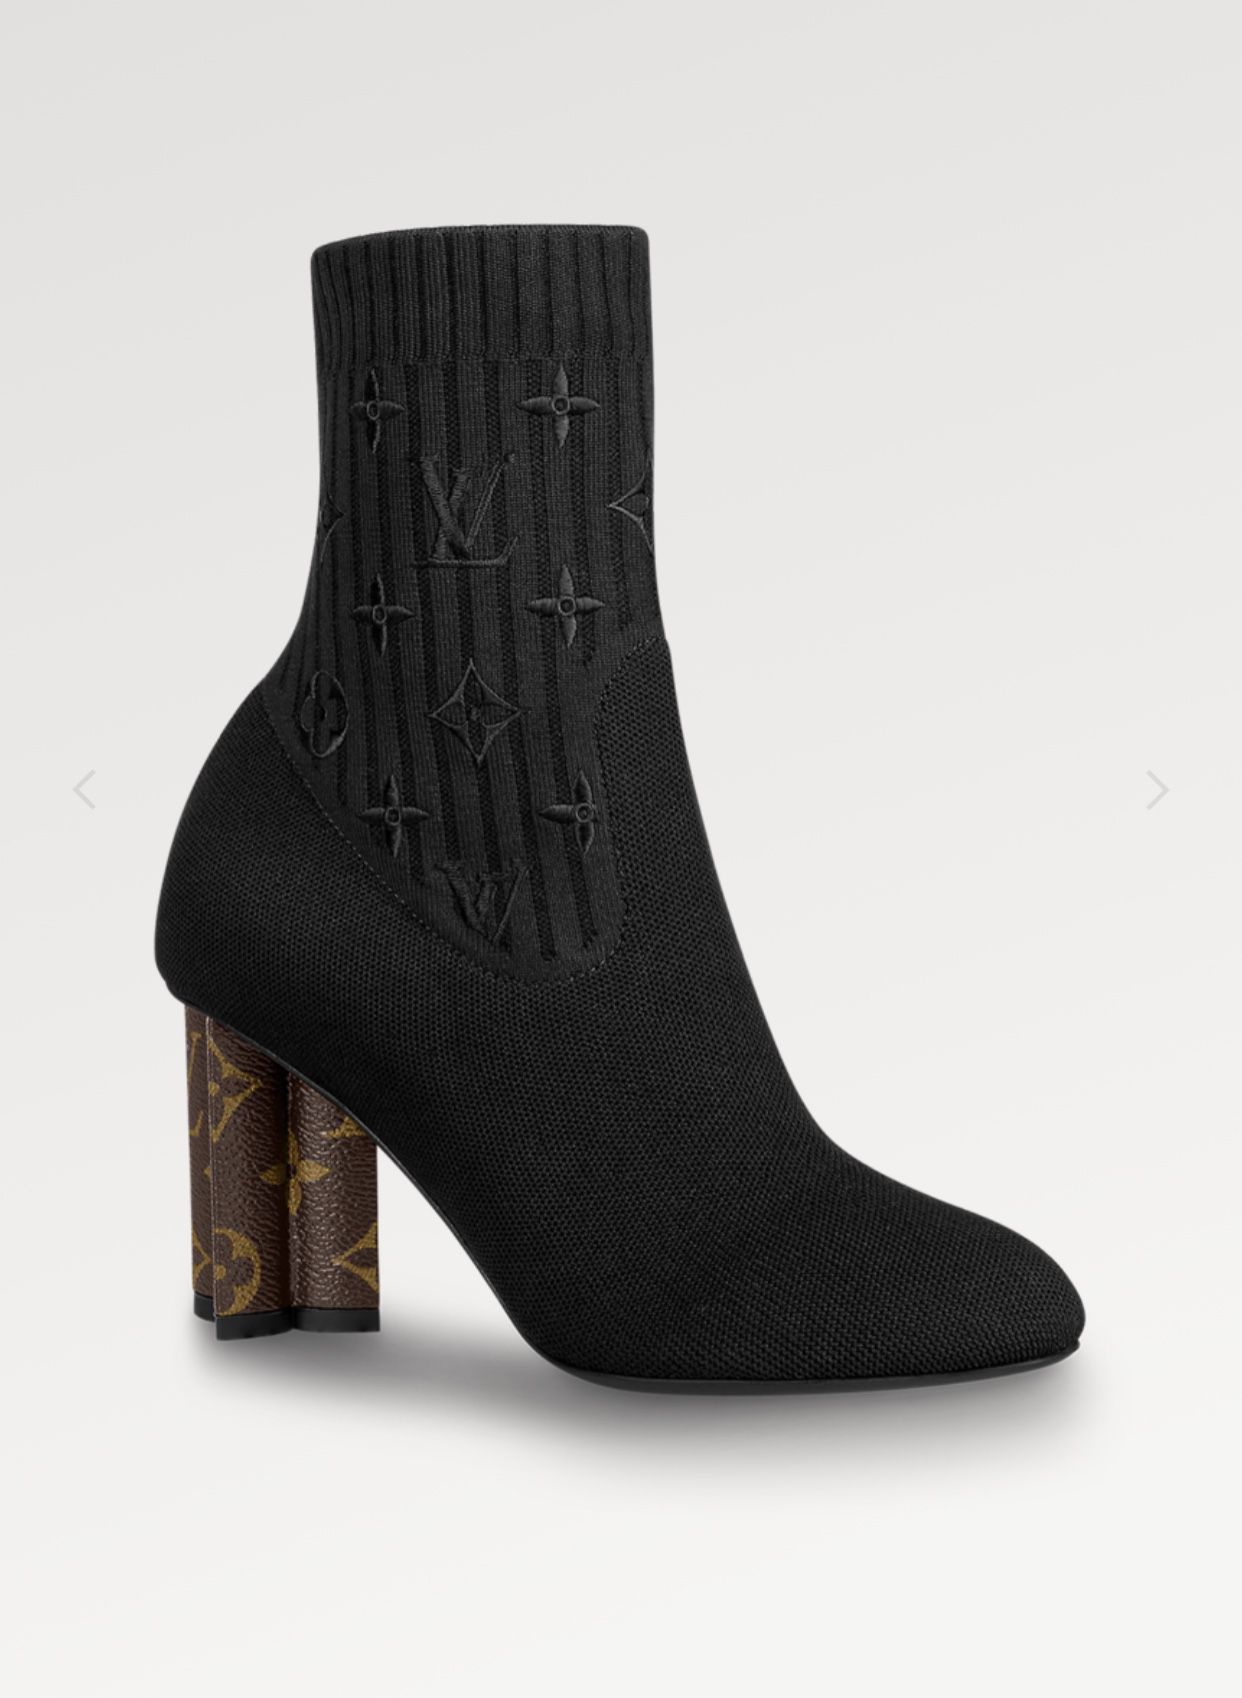 Louis Vuitton Silhouette Ankle Boot (1A8558 1A855C, SILHOUETTE ANKLE BOOT,  1A855A 1A855E 1A8554 1A8556)